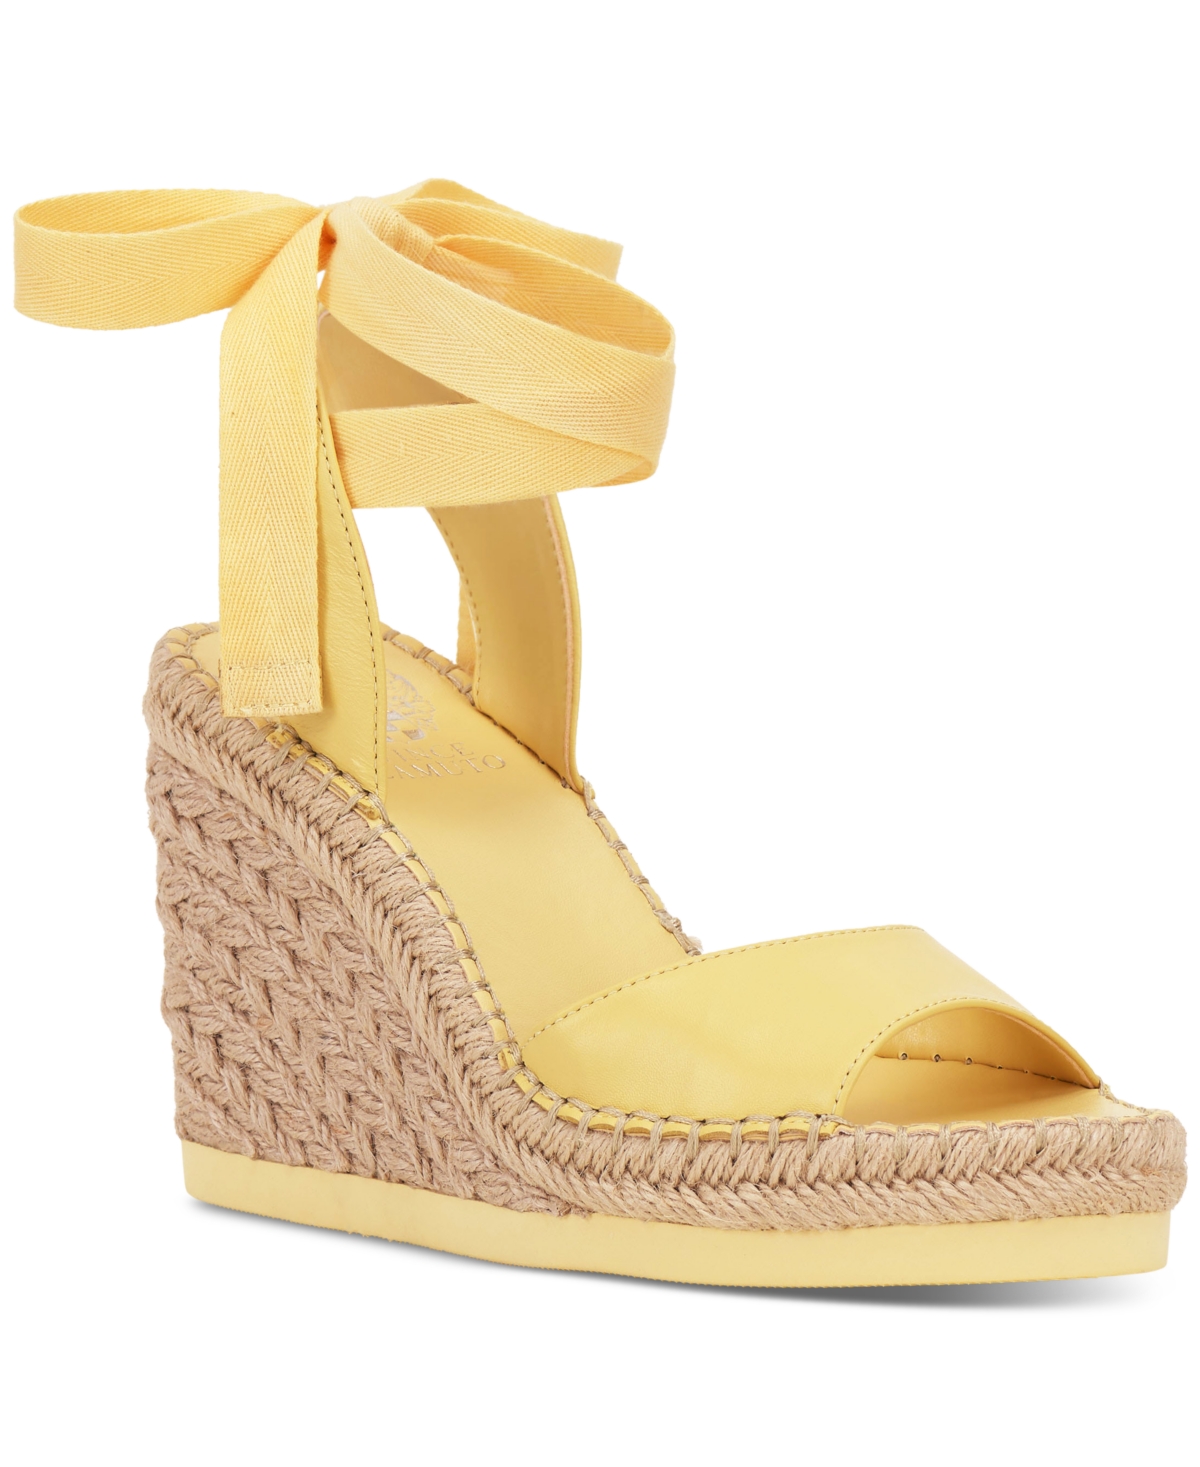 Vince Camuto Women's Bendsen Ankle Wrap Wedge Sandals Women's Shoes In Bright Yellow